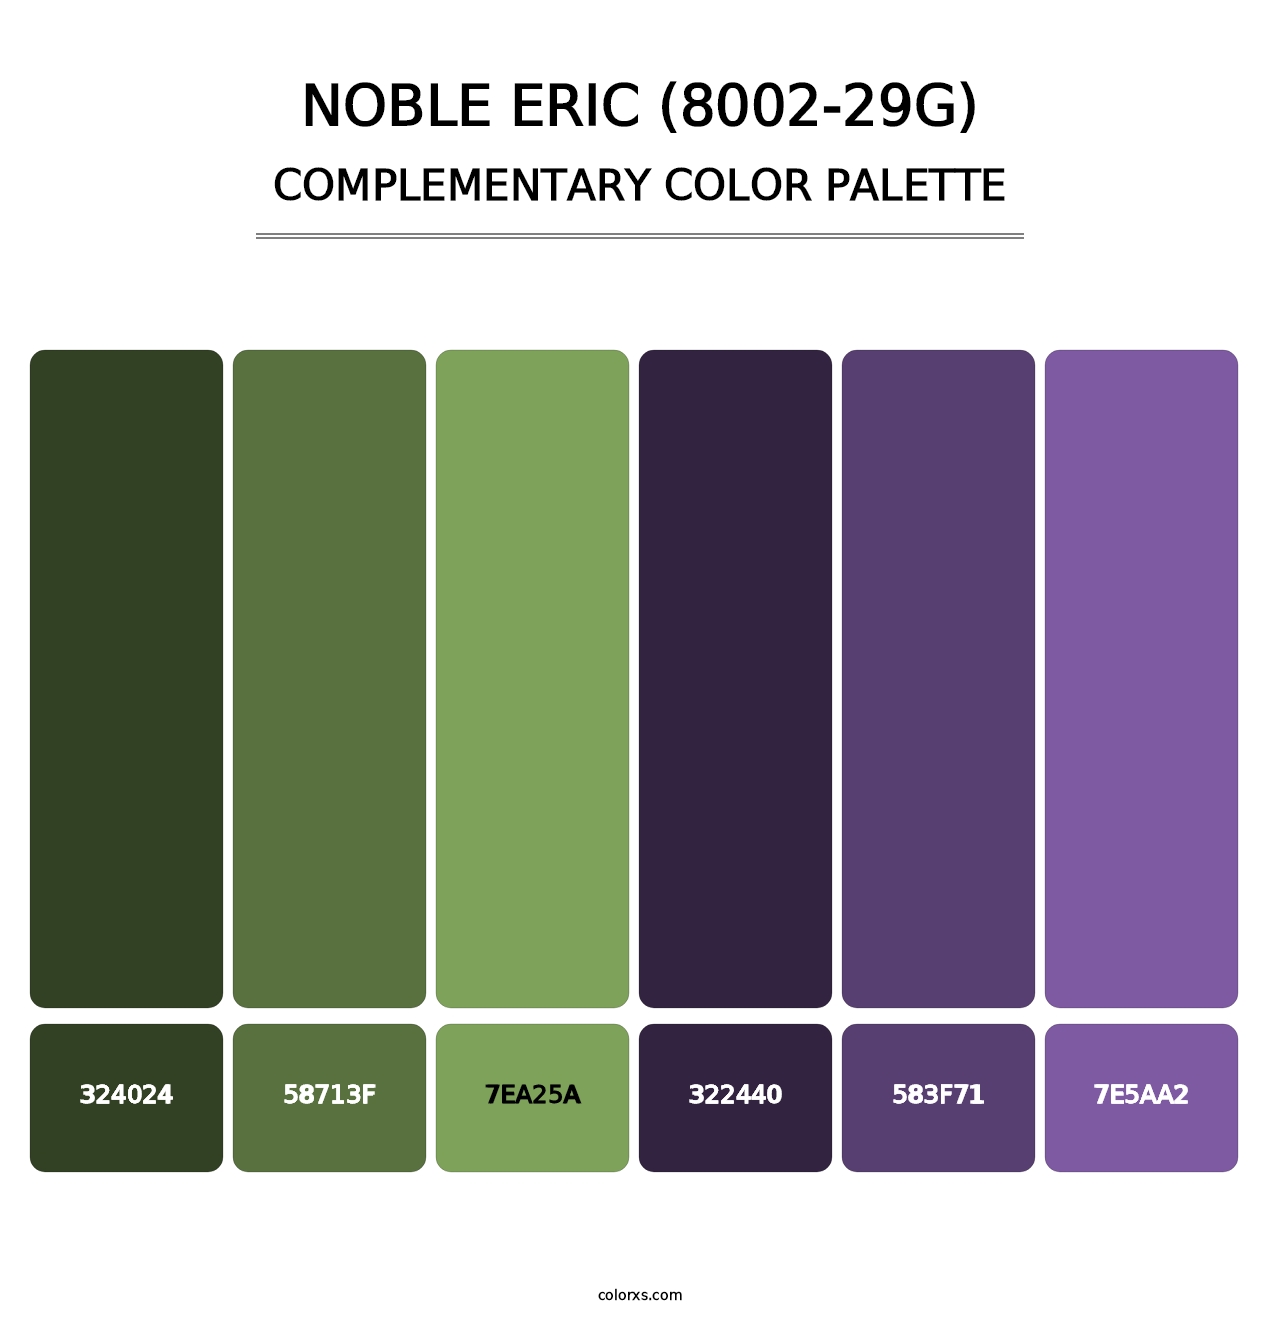 Noble Eric (8002-29G) - Complementary Color Palette